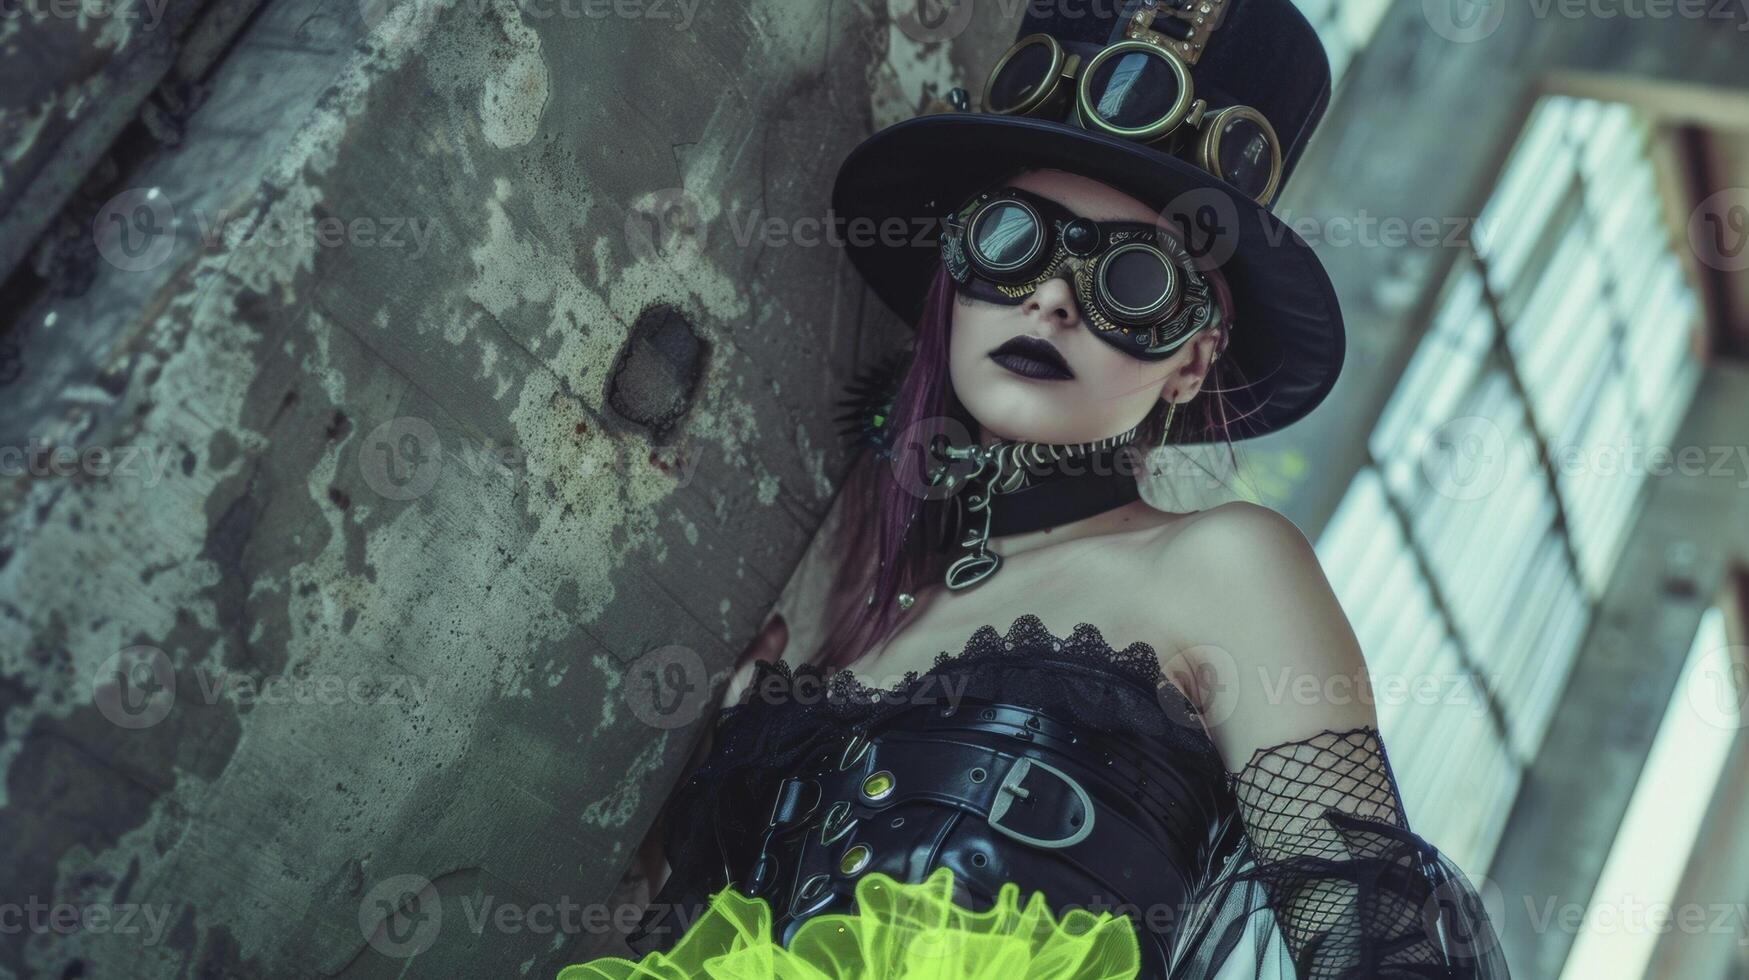 Mixing in elements from the steampunk fashion movement this cybergoth look features a leather corset black top hat and goggles. Neon green accents like a skirt and fishne photo